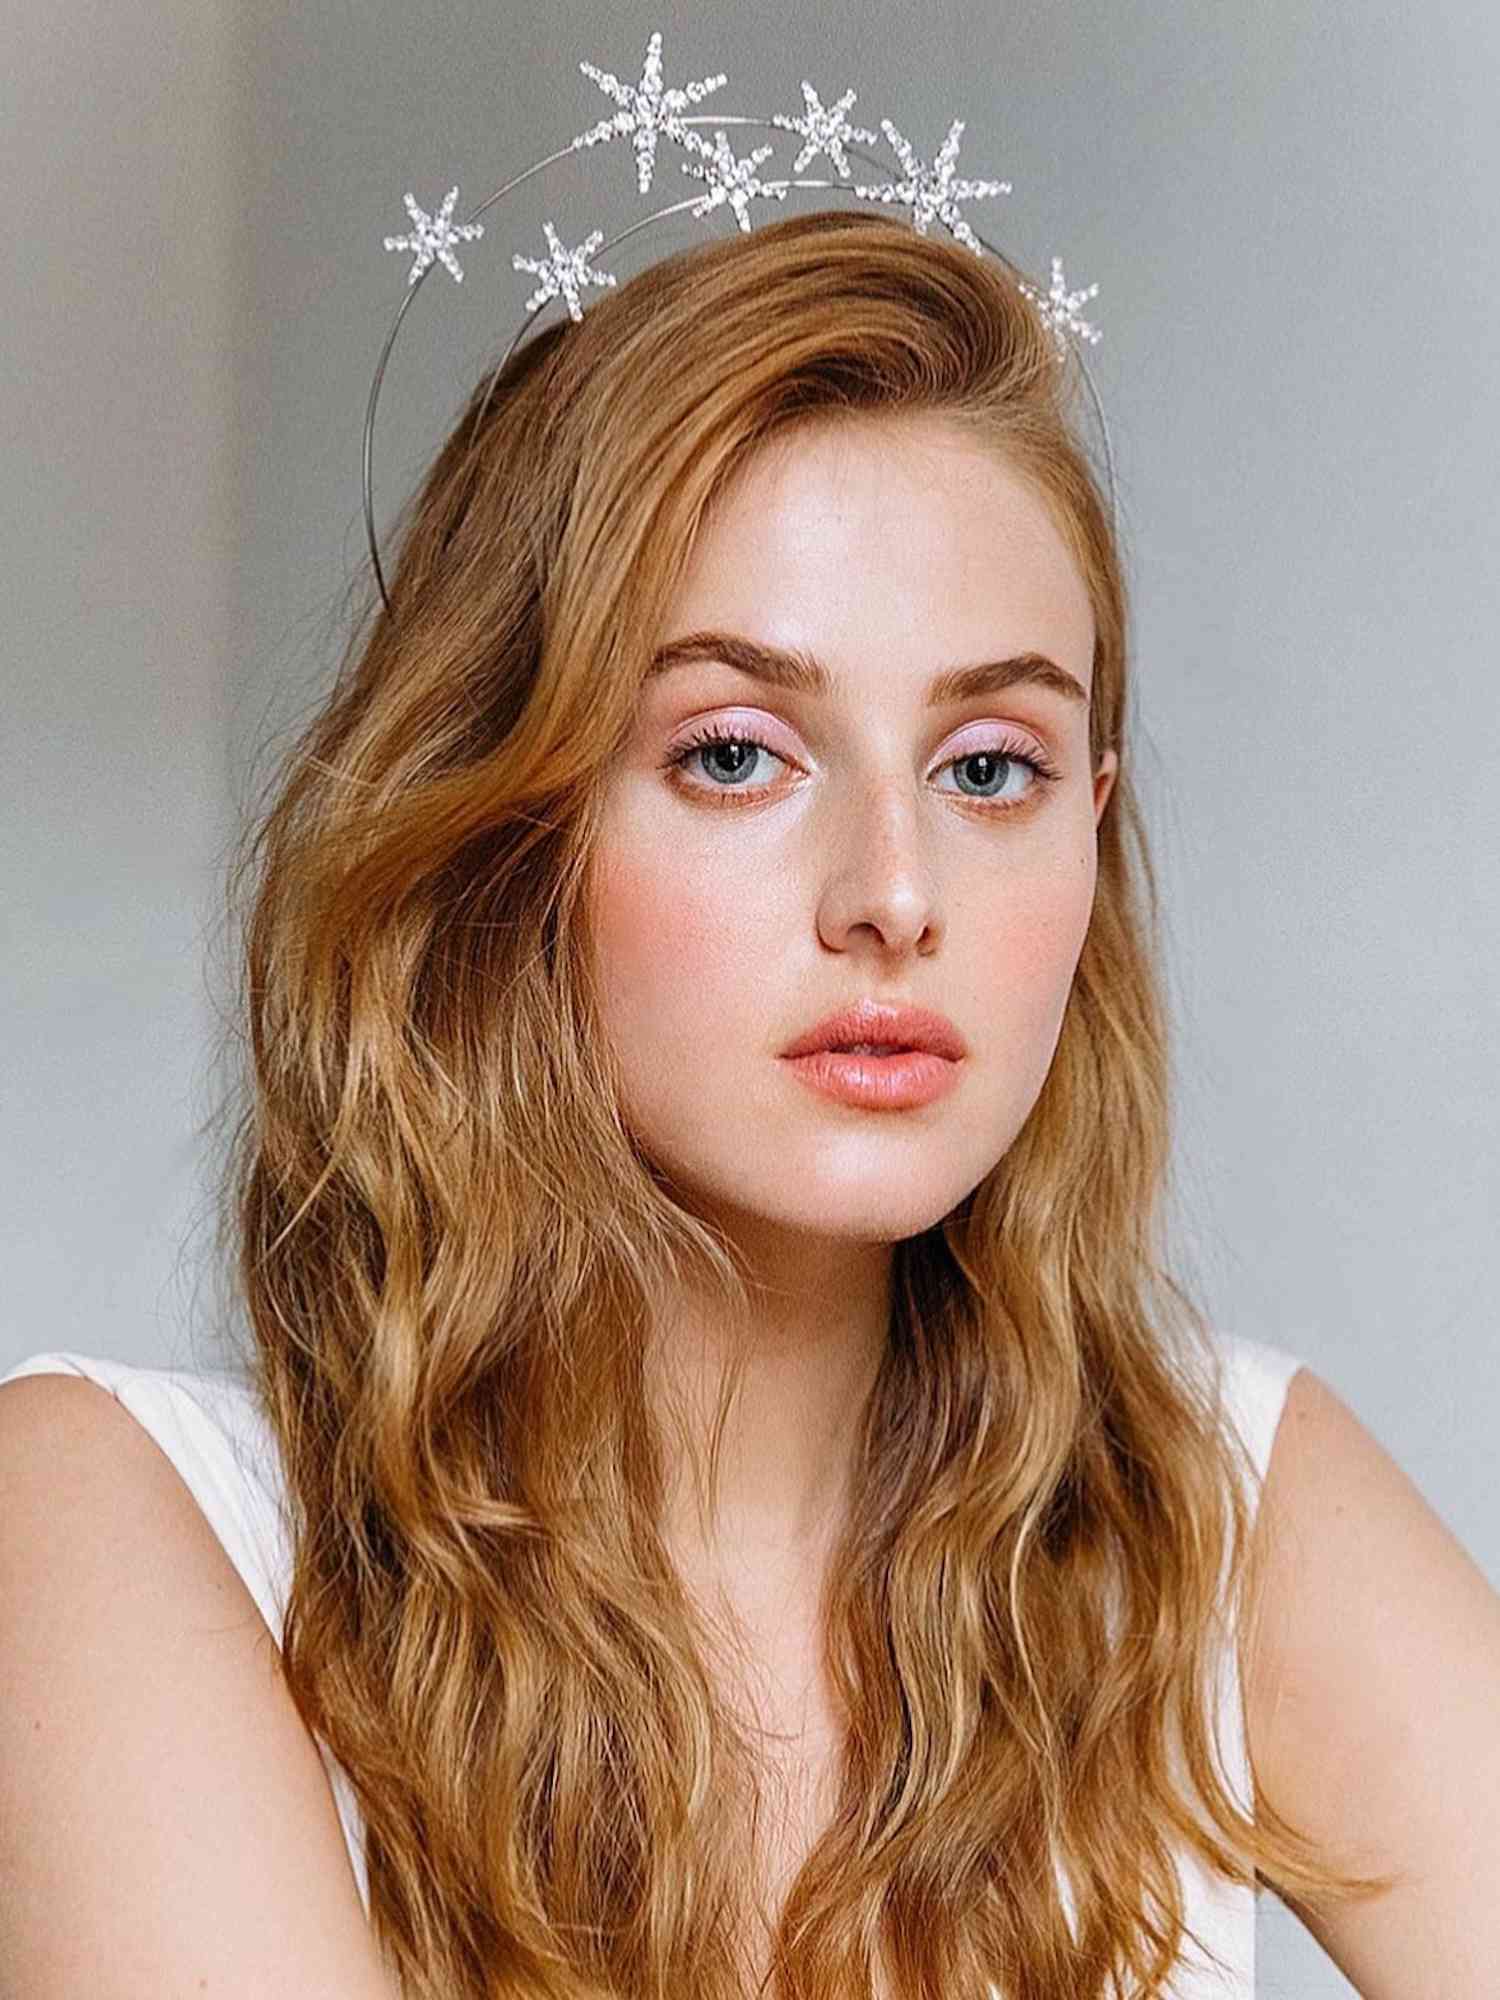 Woman with ginger hair, pink-toned makeup, and star floating headband